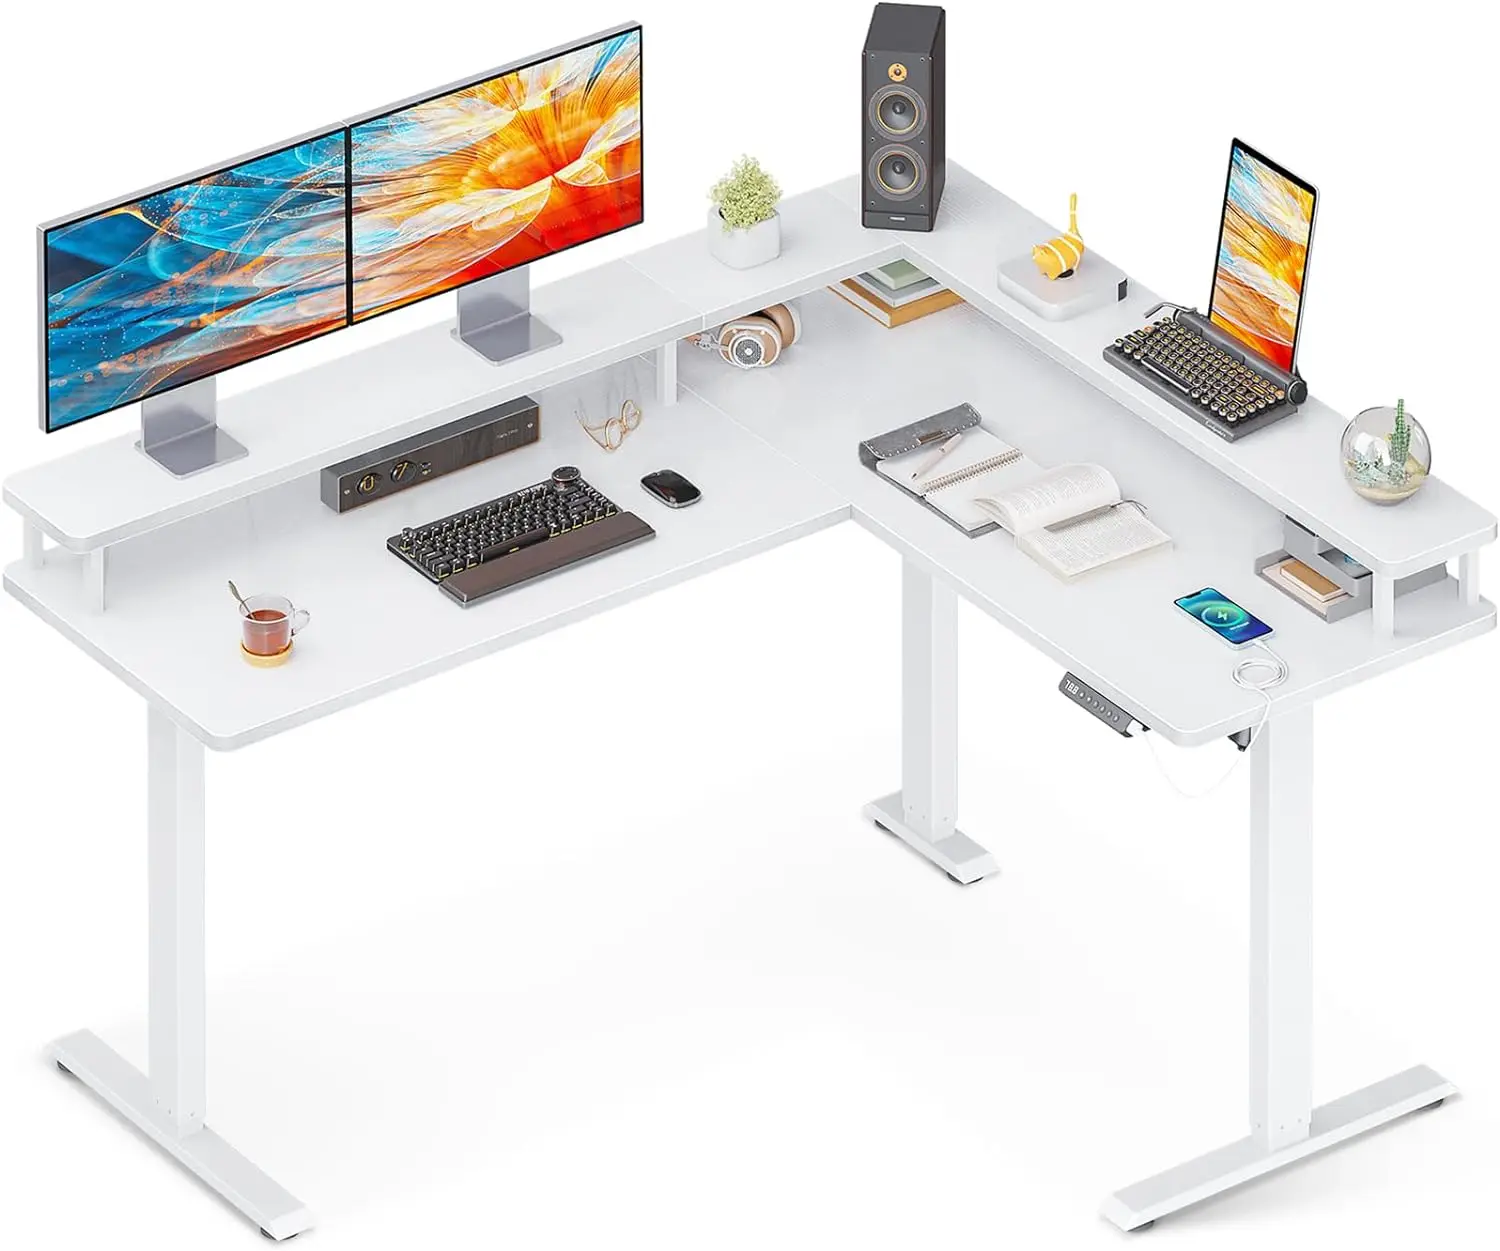 

L Shaped Electric Standing Desk, 59" x 48" Stand Up Corner Desk, Home Office Sit Stand Desk with White Top and White Frame